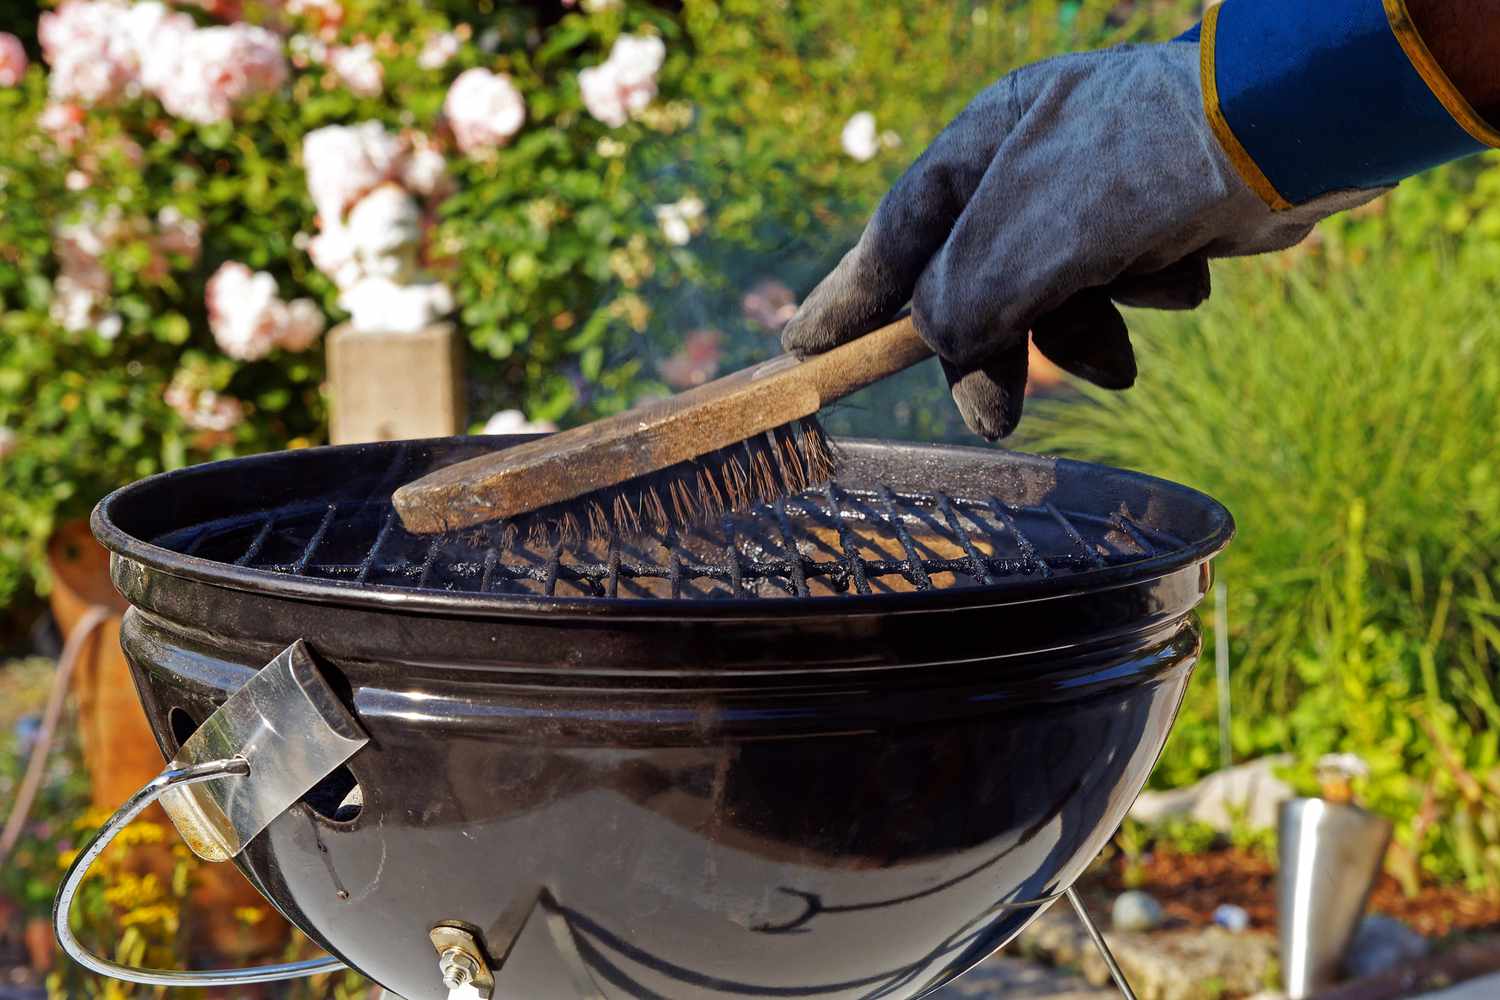 How To Clean A Grill Brush